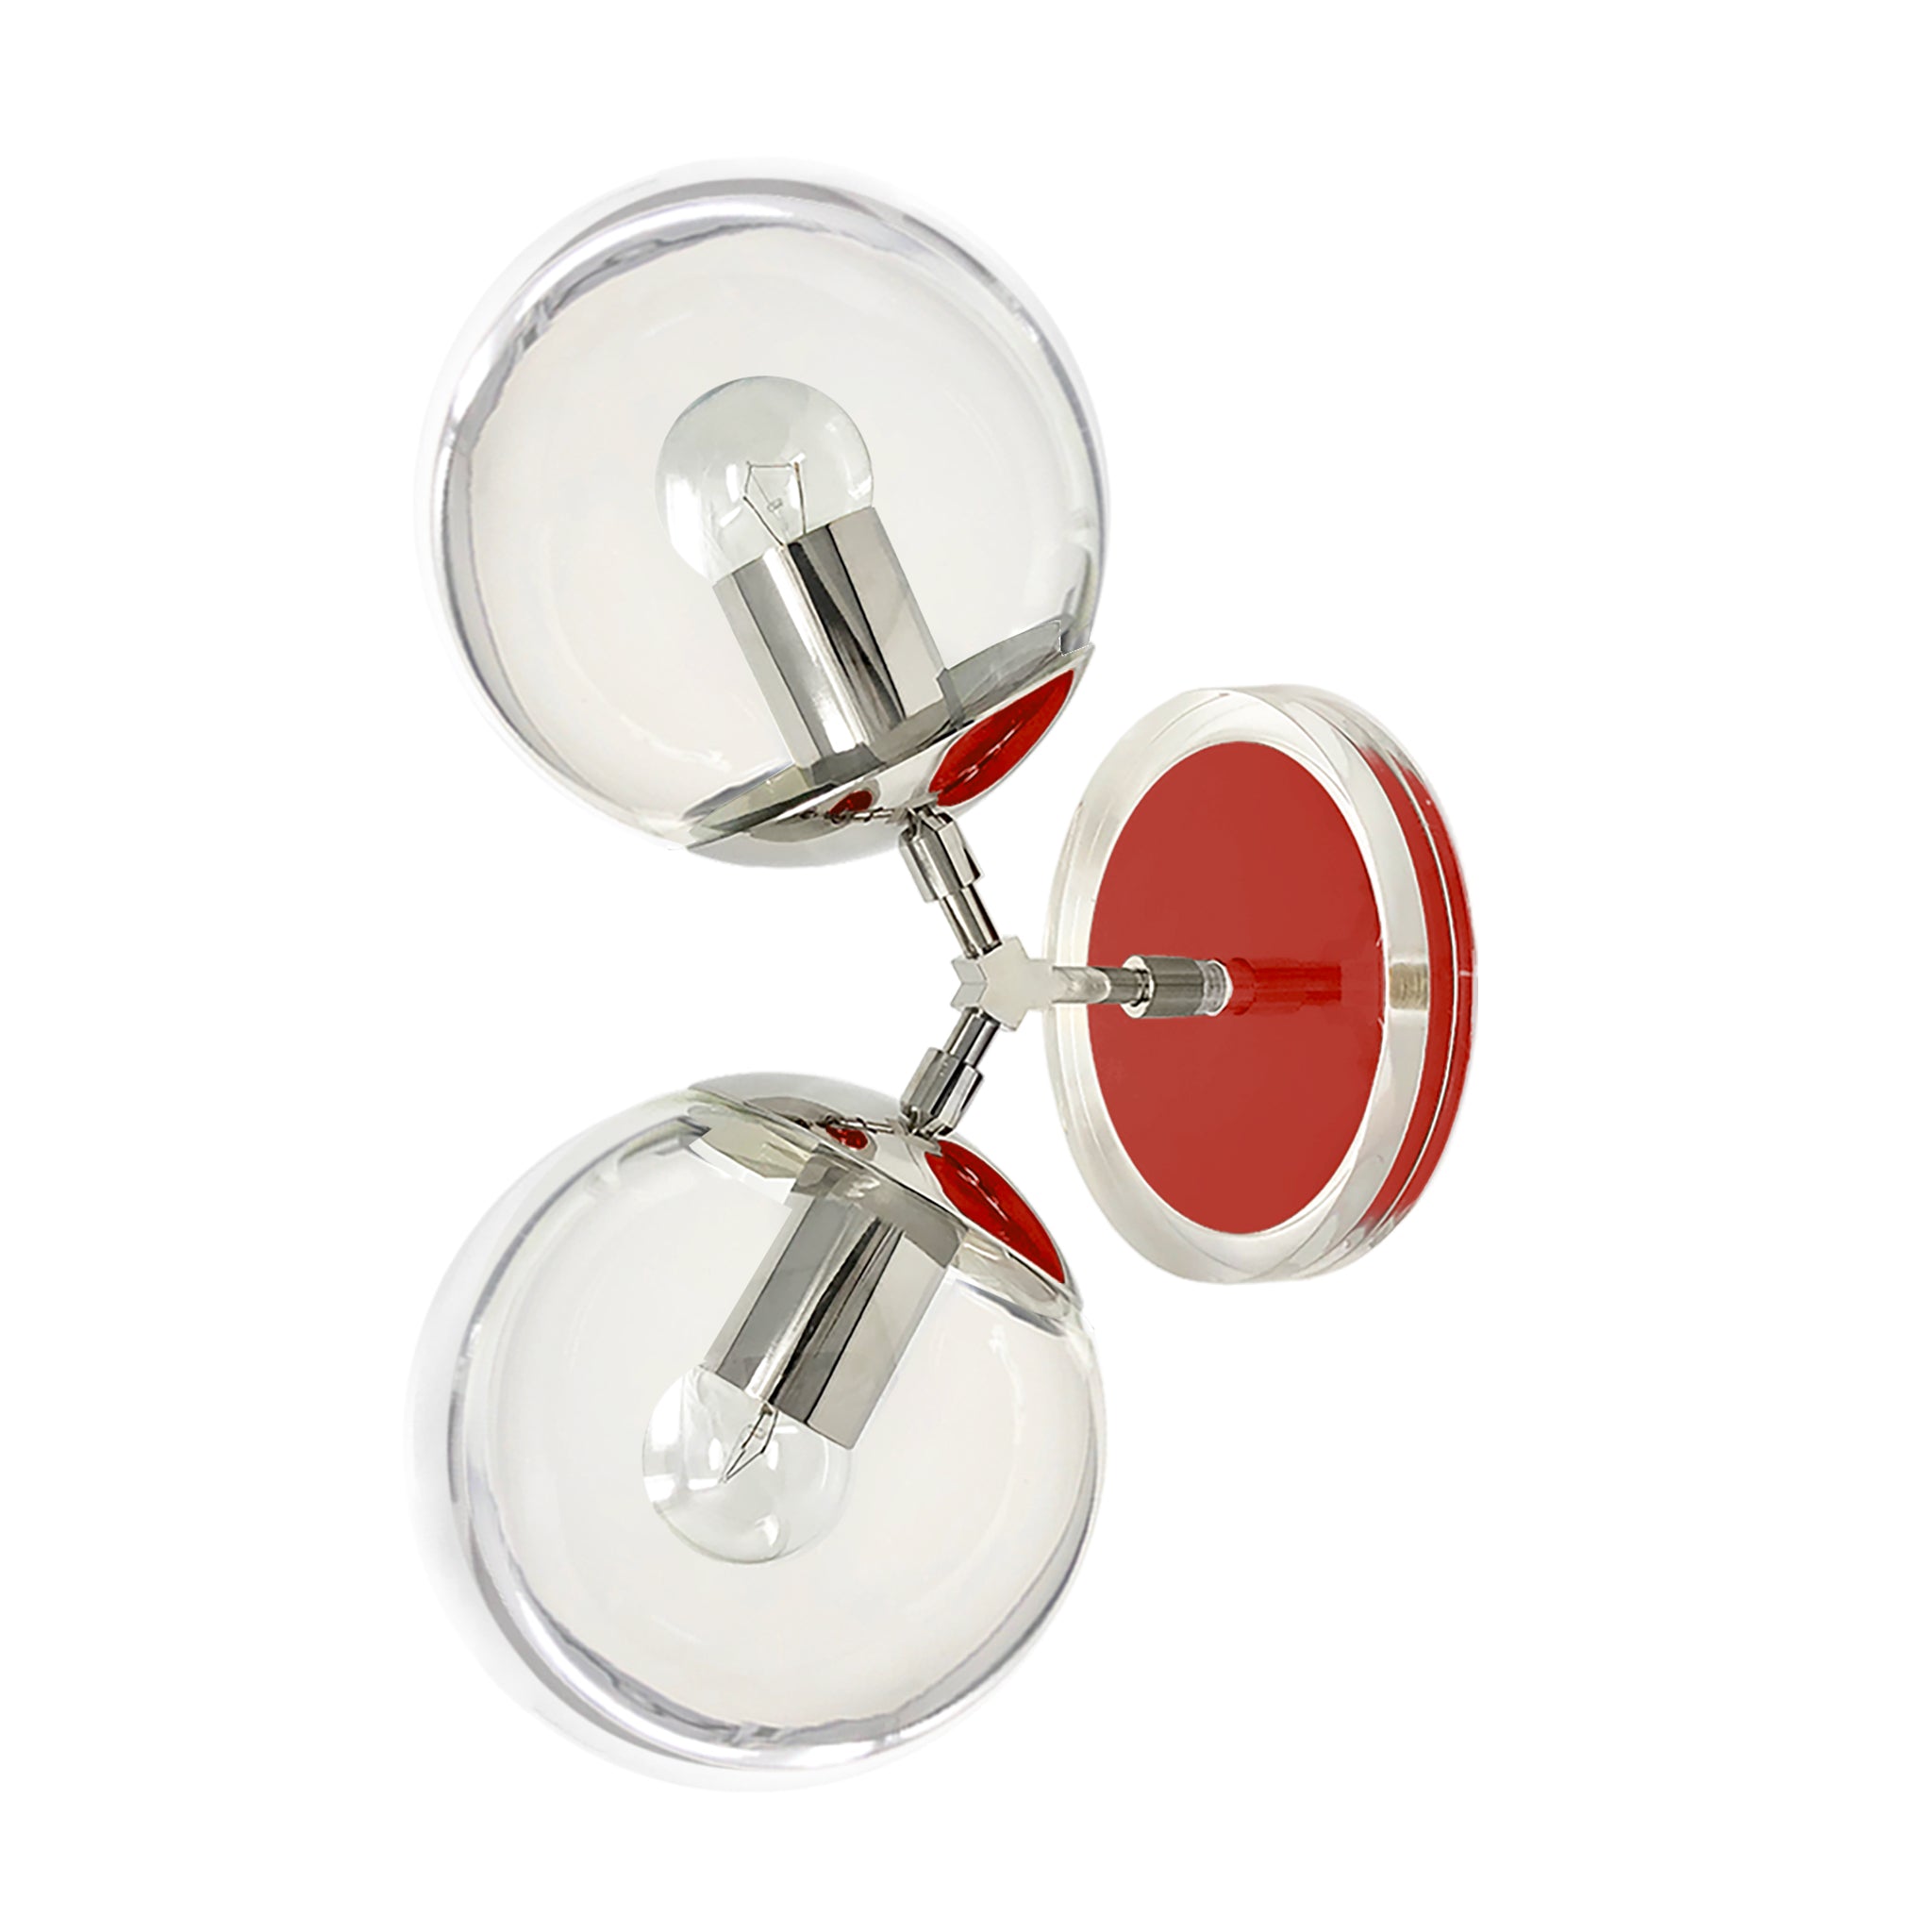 Nickel and riding hood red color Visage sconce 6" Dutton Brown lighting